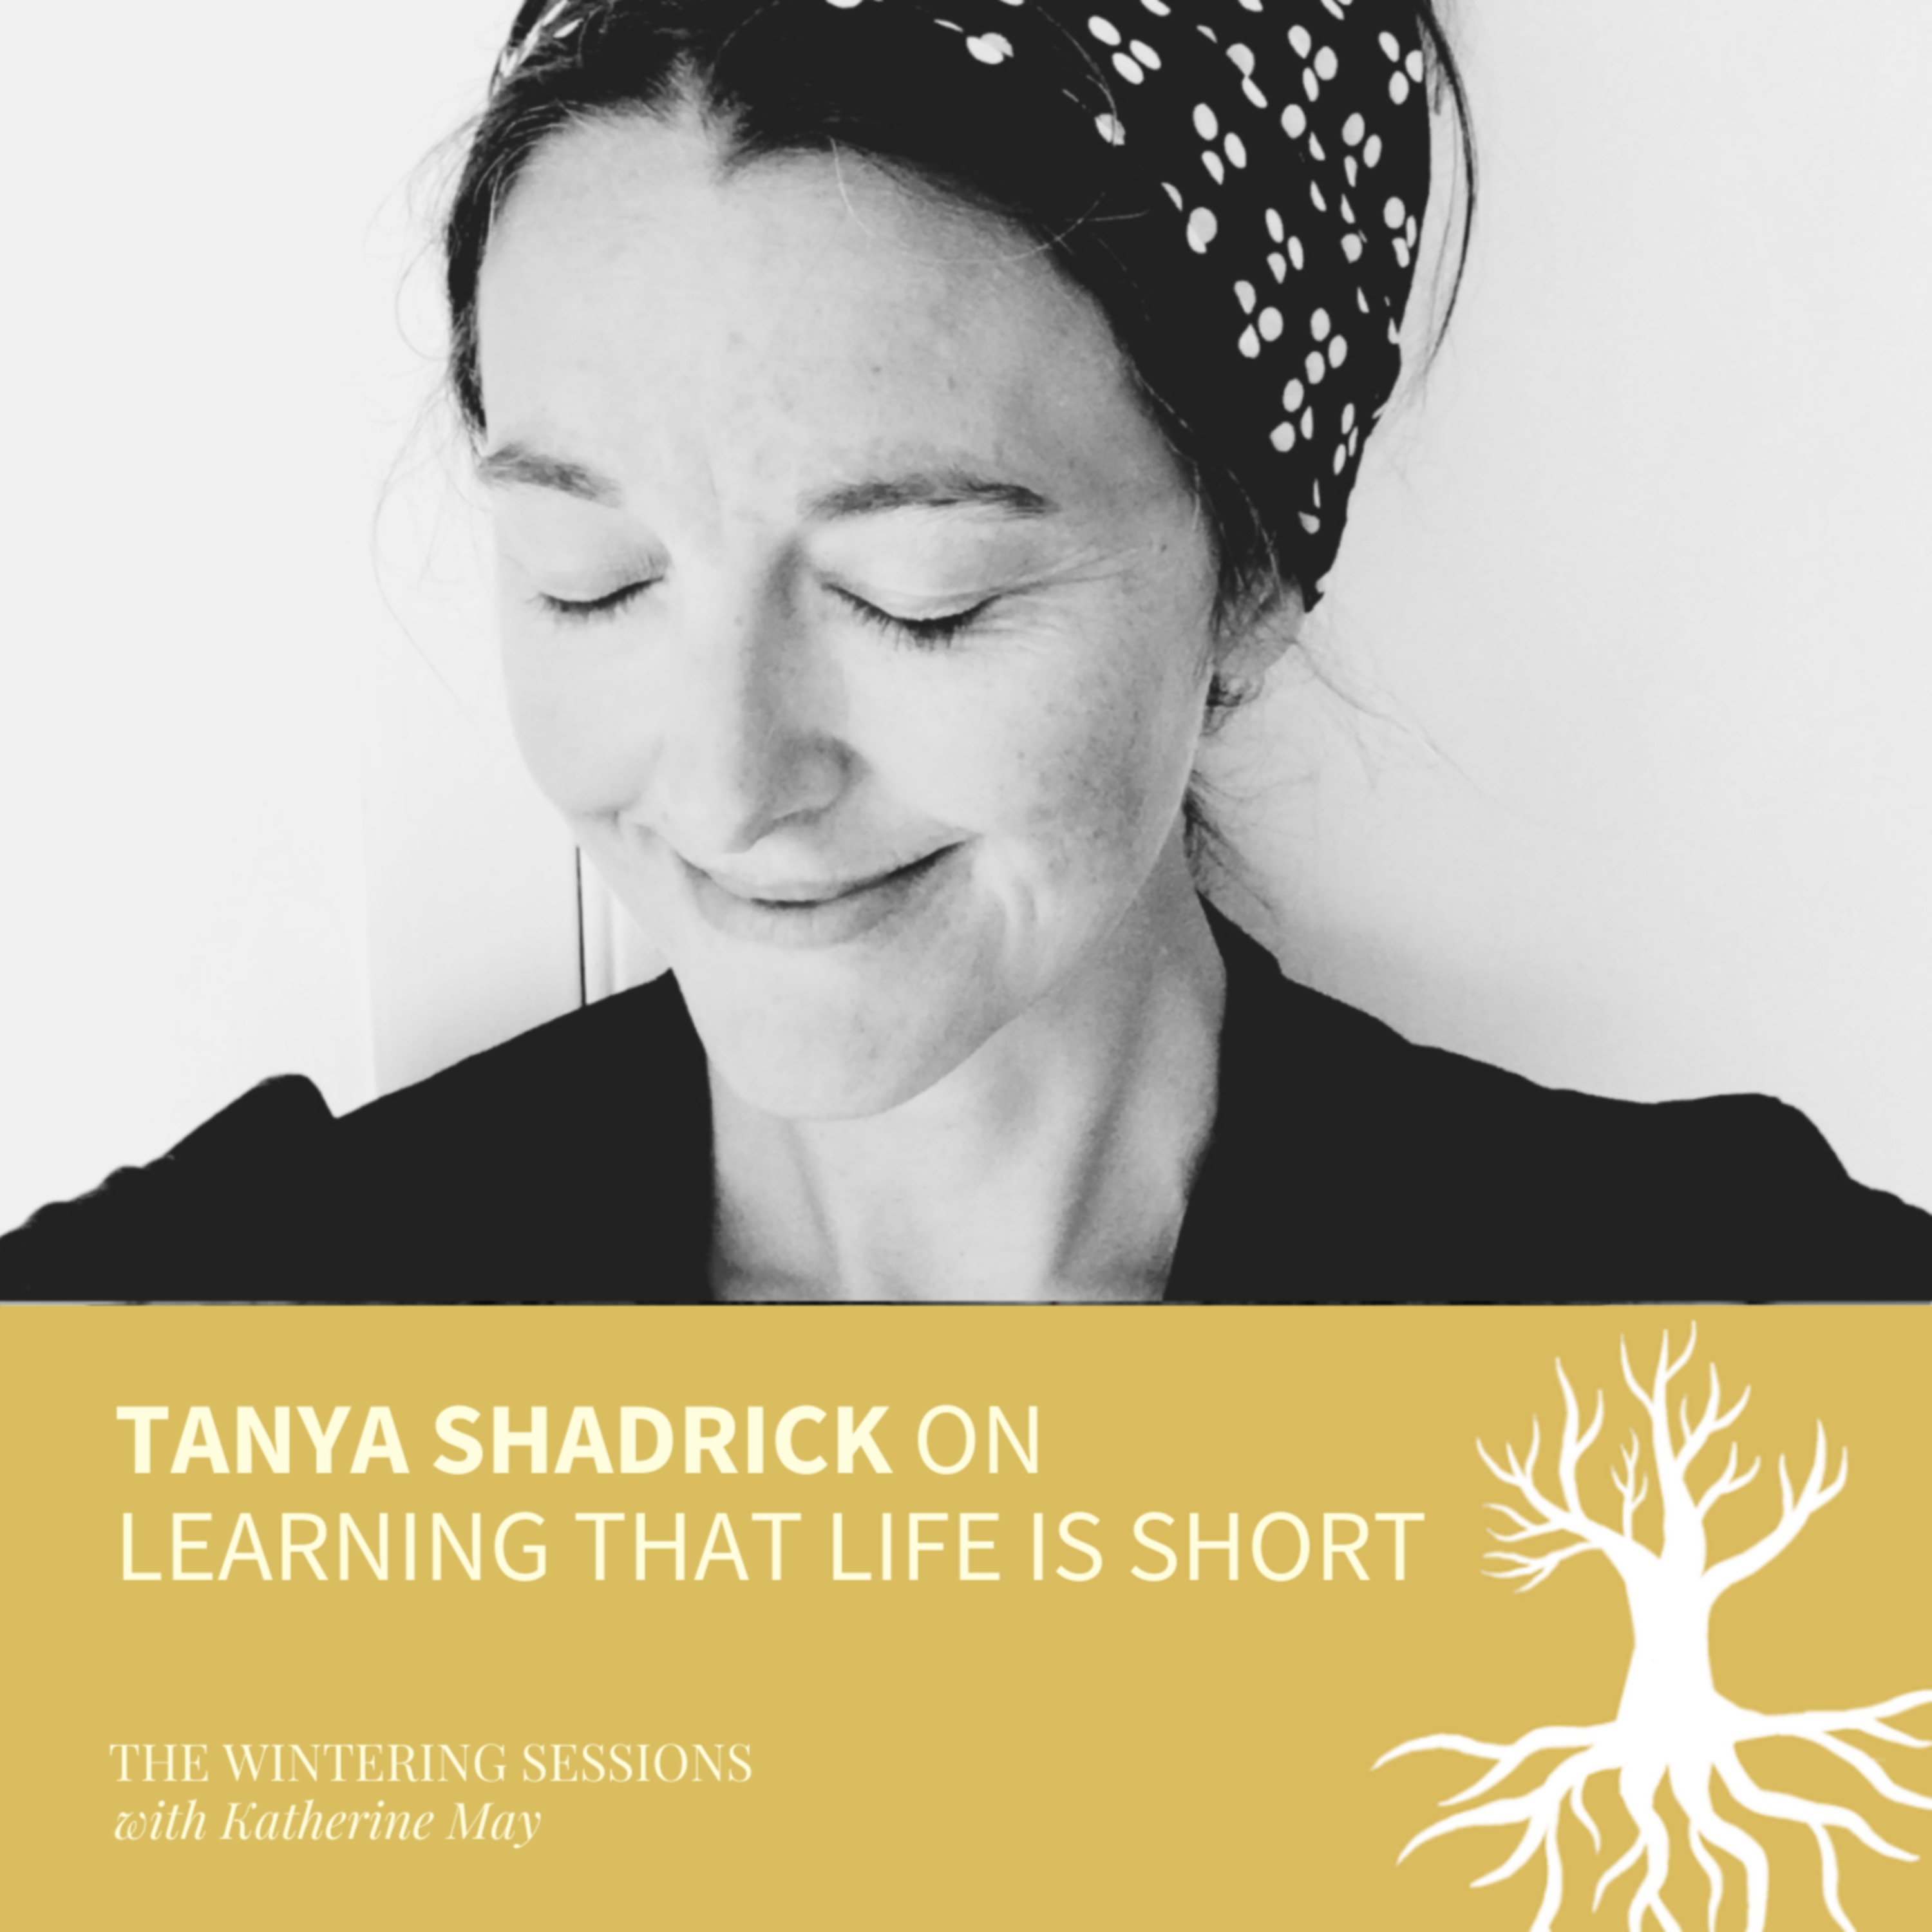 Tanya Shadrick on learning that life is short